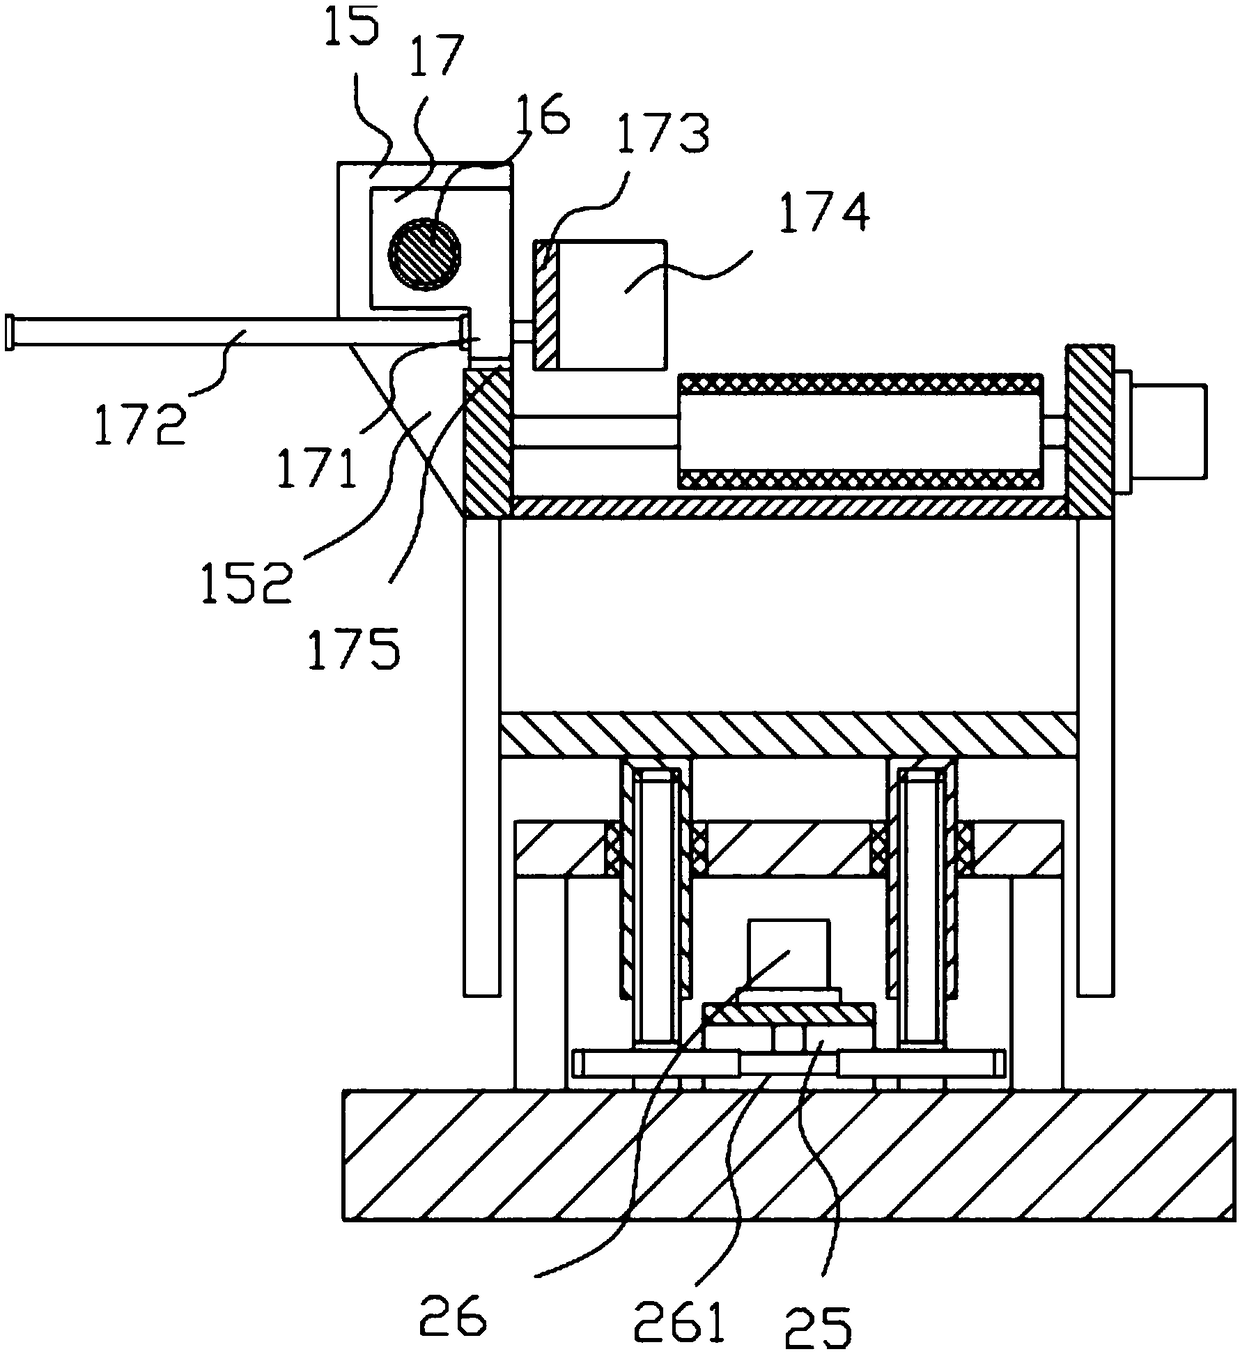 Height adjustable component conveying and material selecting mechanism